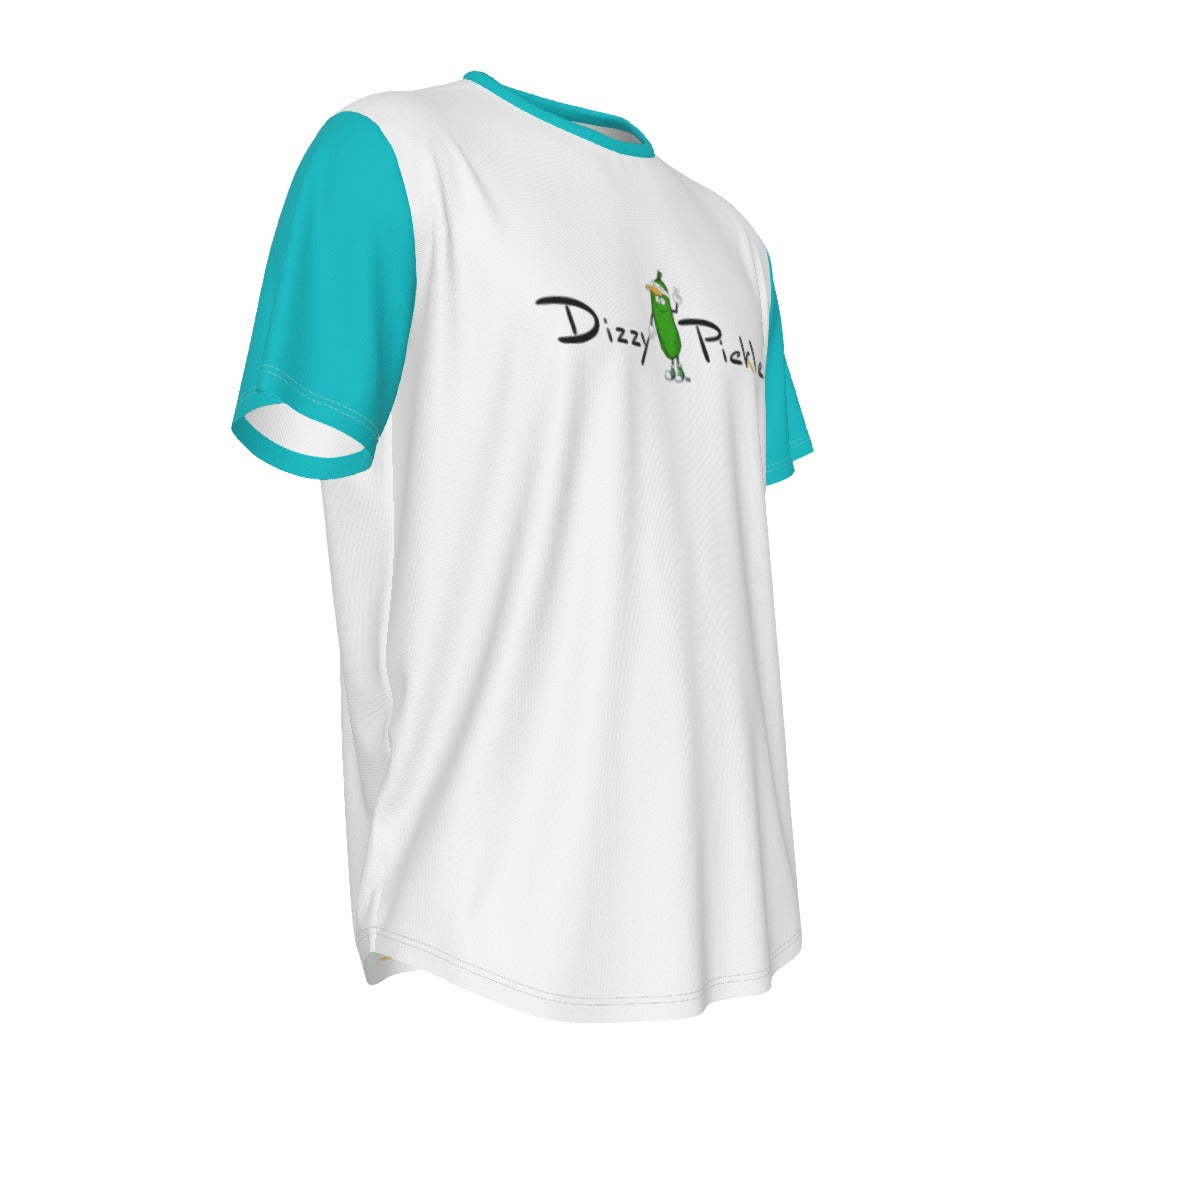 DZY P Classic - White/Cool Teal - Men's Short Sleeve Rounded Hem by Dizzy Pickle